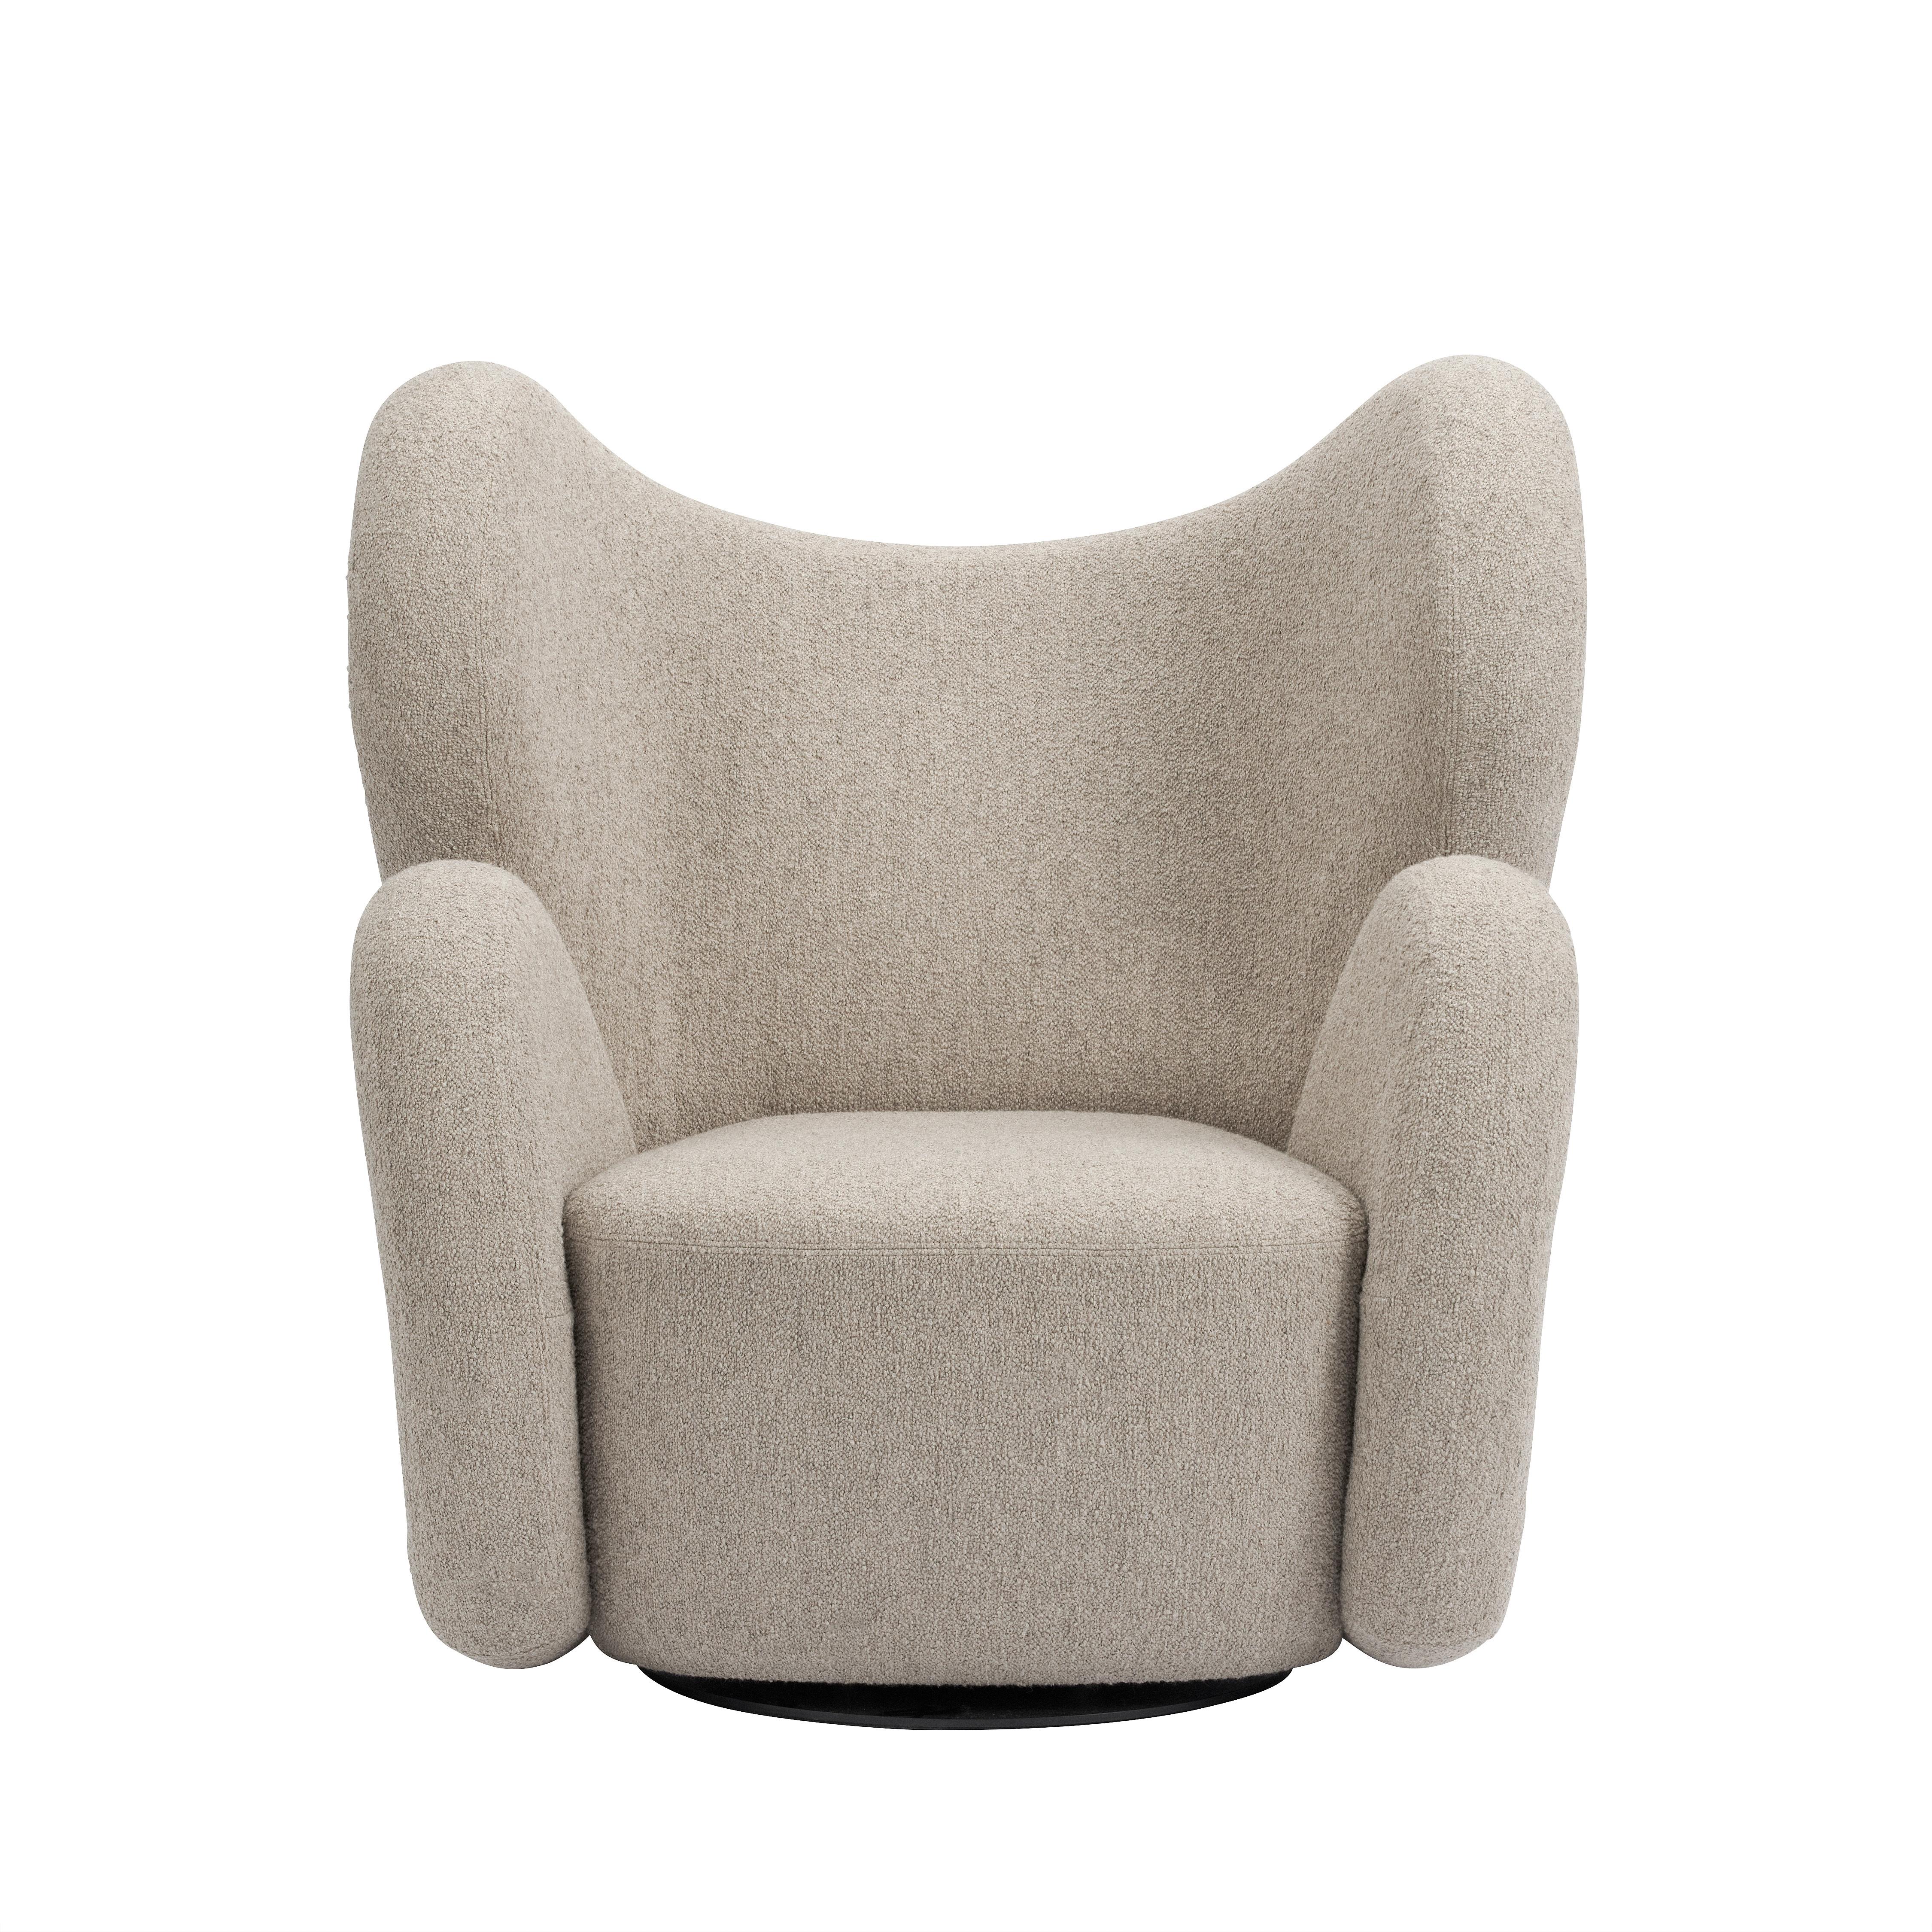 BIG big chair armchair.
Signed by Kristian Sofus Hansen and Tommy Hyldahl for Norr11. 

Model shown on the picture:
Fabric: Barnum Bouclé 02
Made in Italy

Appropriately named, the Big Big Chair is the bigger version of the compact Little Big